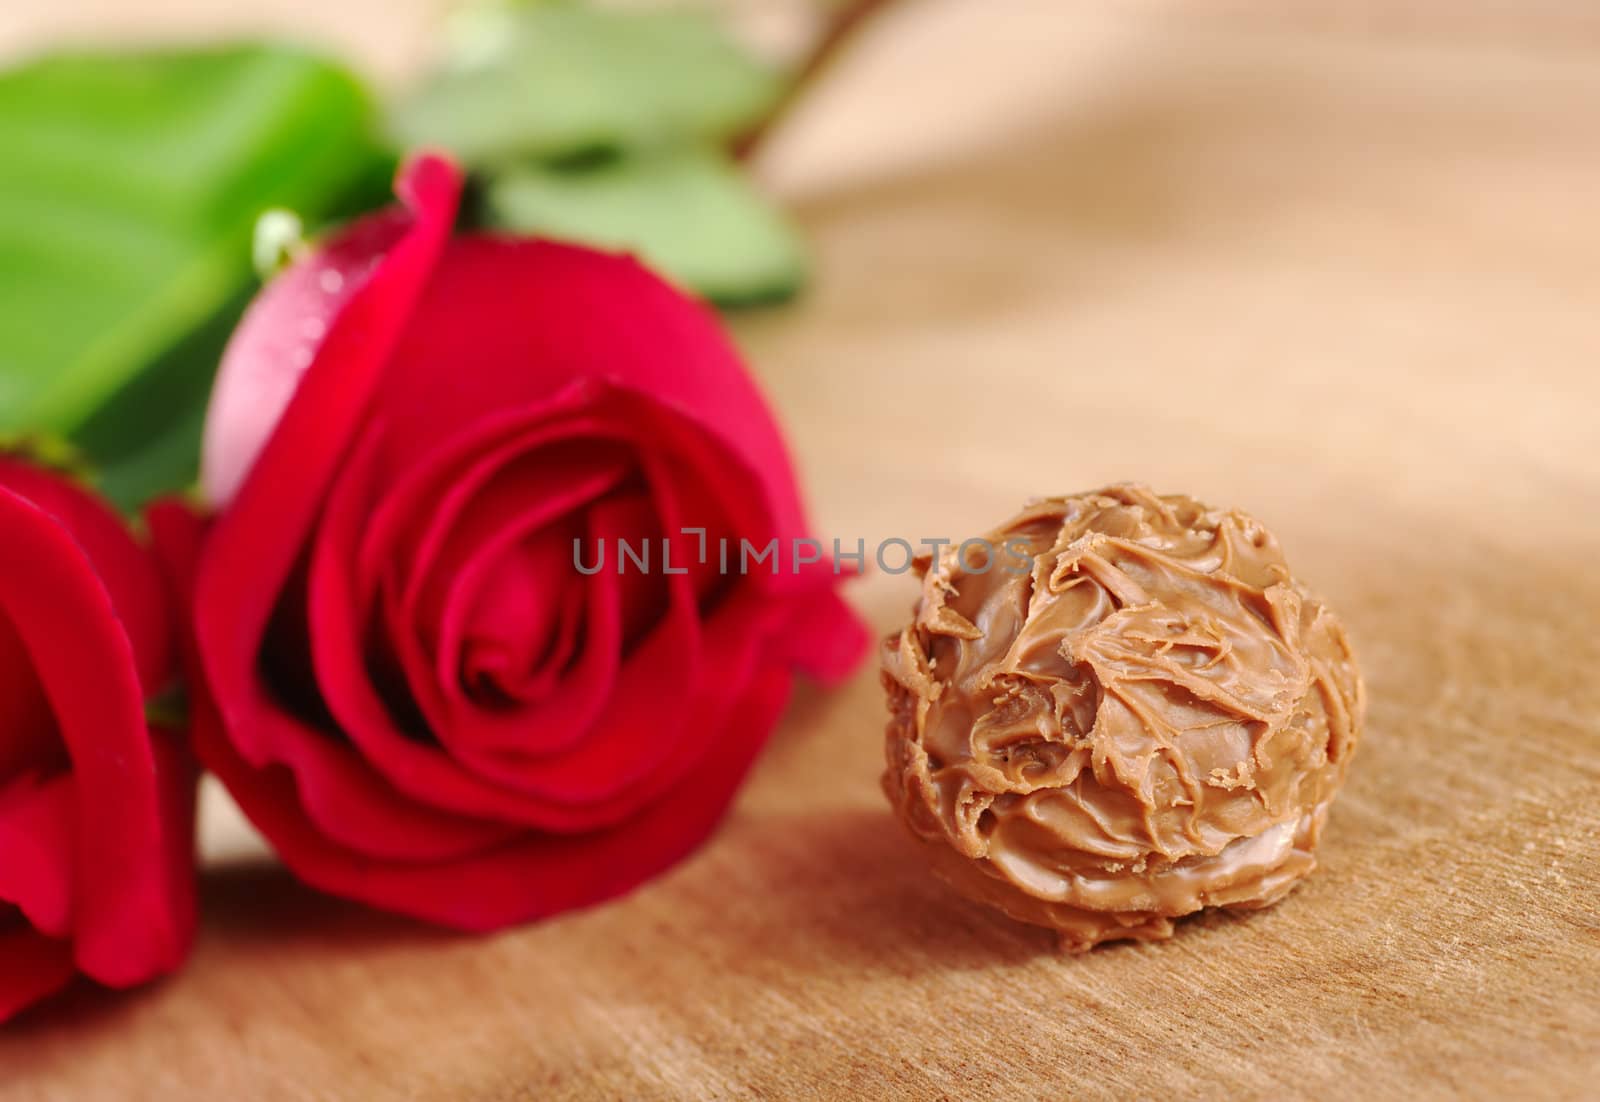 Truffle with red rose on wooden board (Very Shallow Depth of Field, Focus on the front of the truffle)